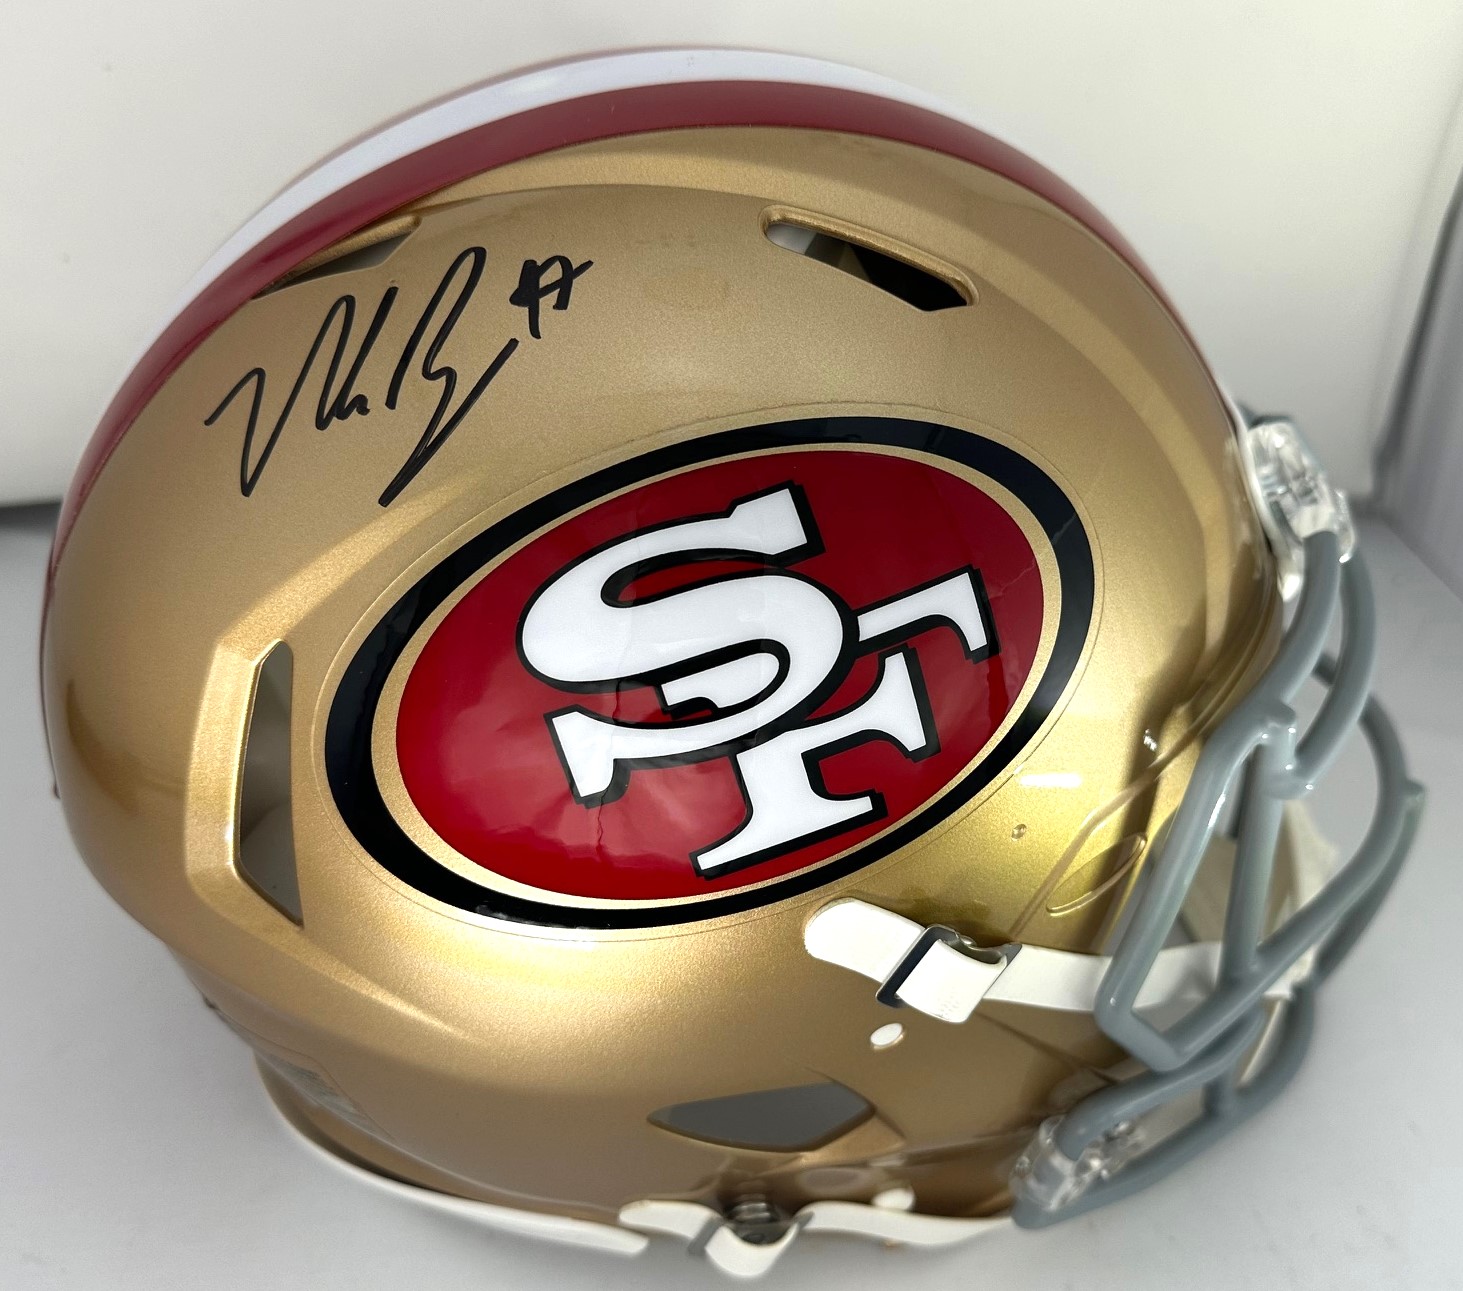 NICK BOSA SIGNED FULL SIZE SF 49ERS AUTHENTIC SPEED HELMET - BAS